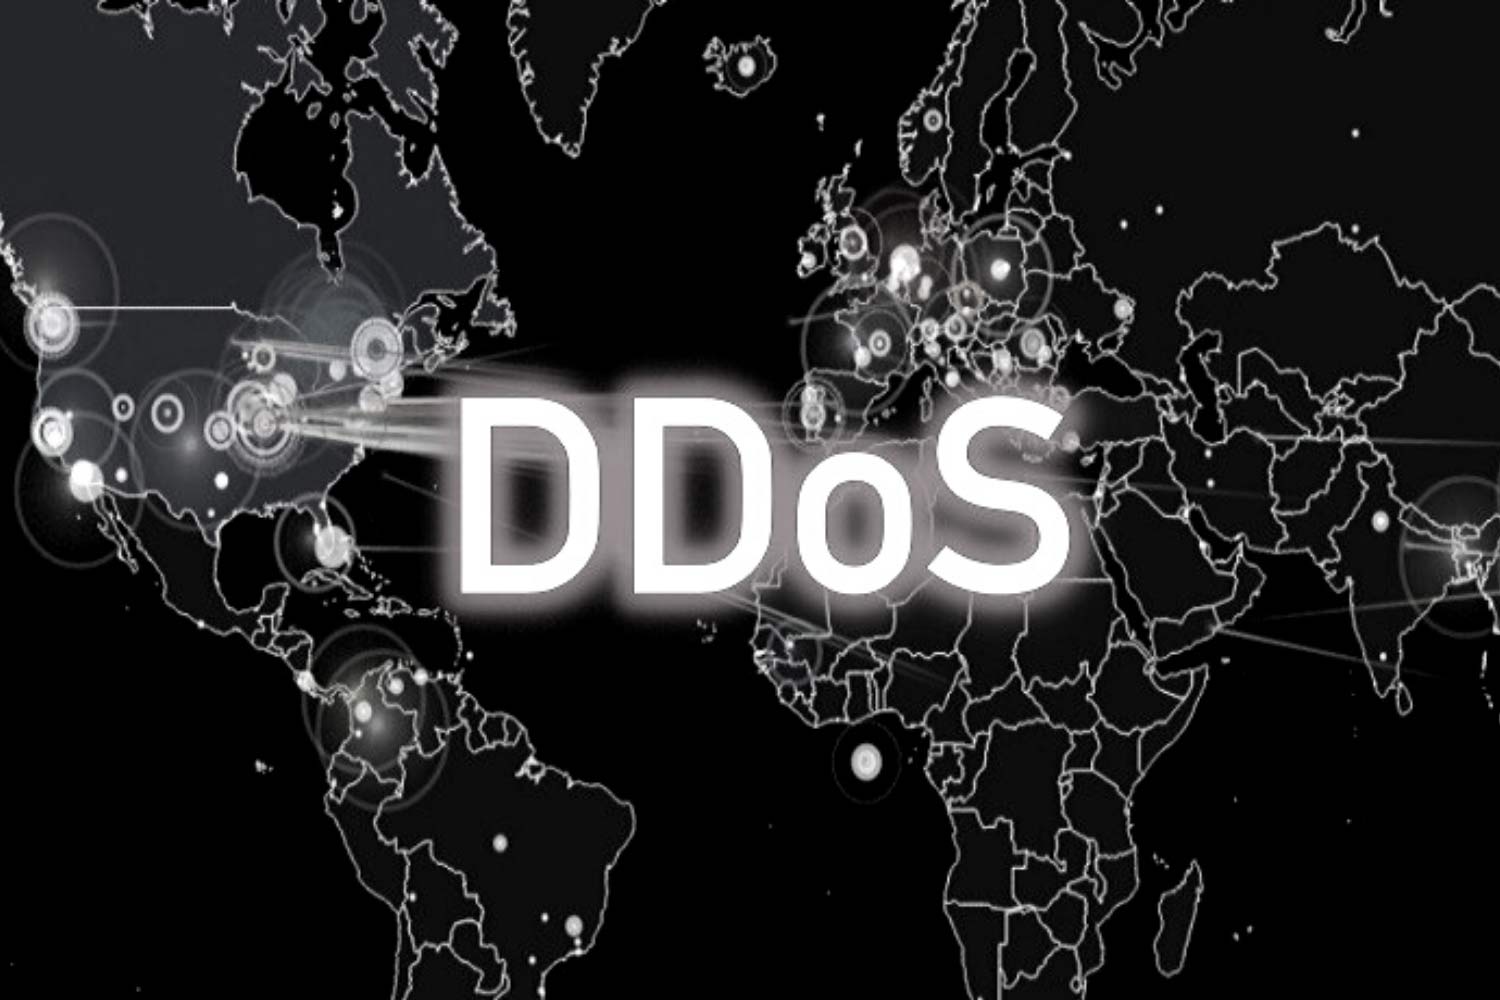 The 15 Top Ddos Statistics You Should Know In 2020